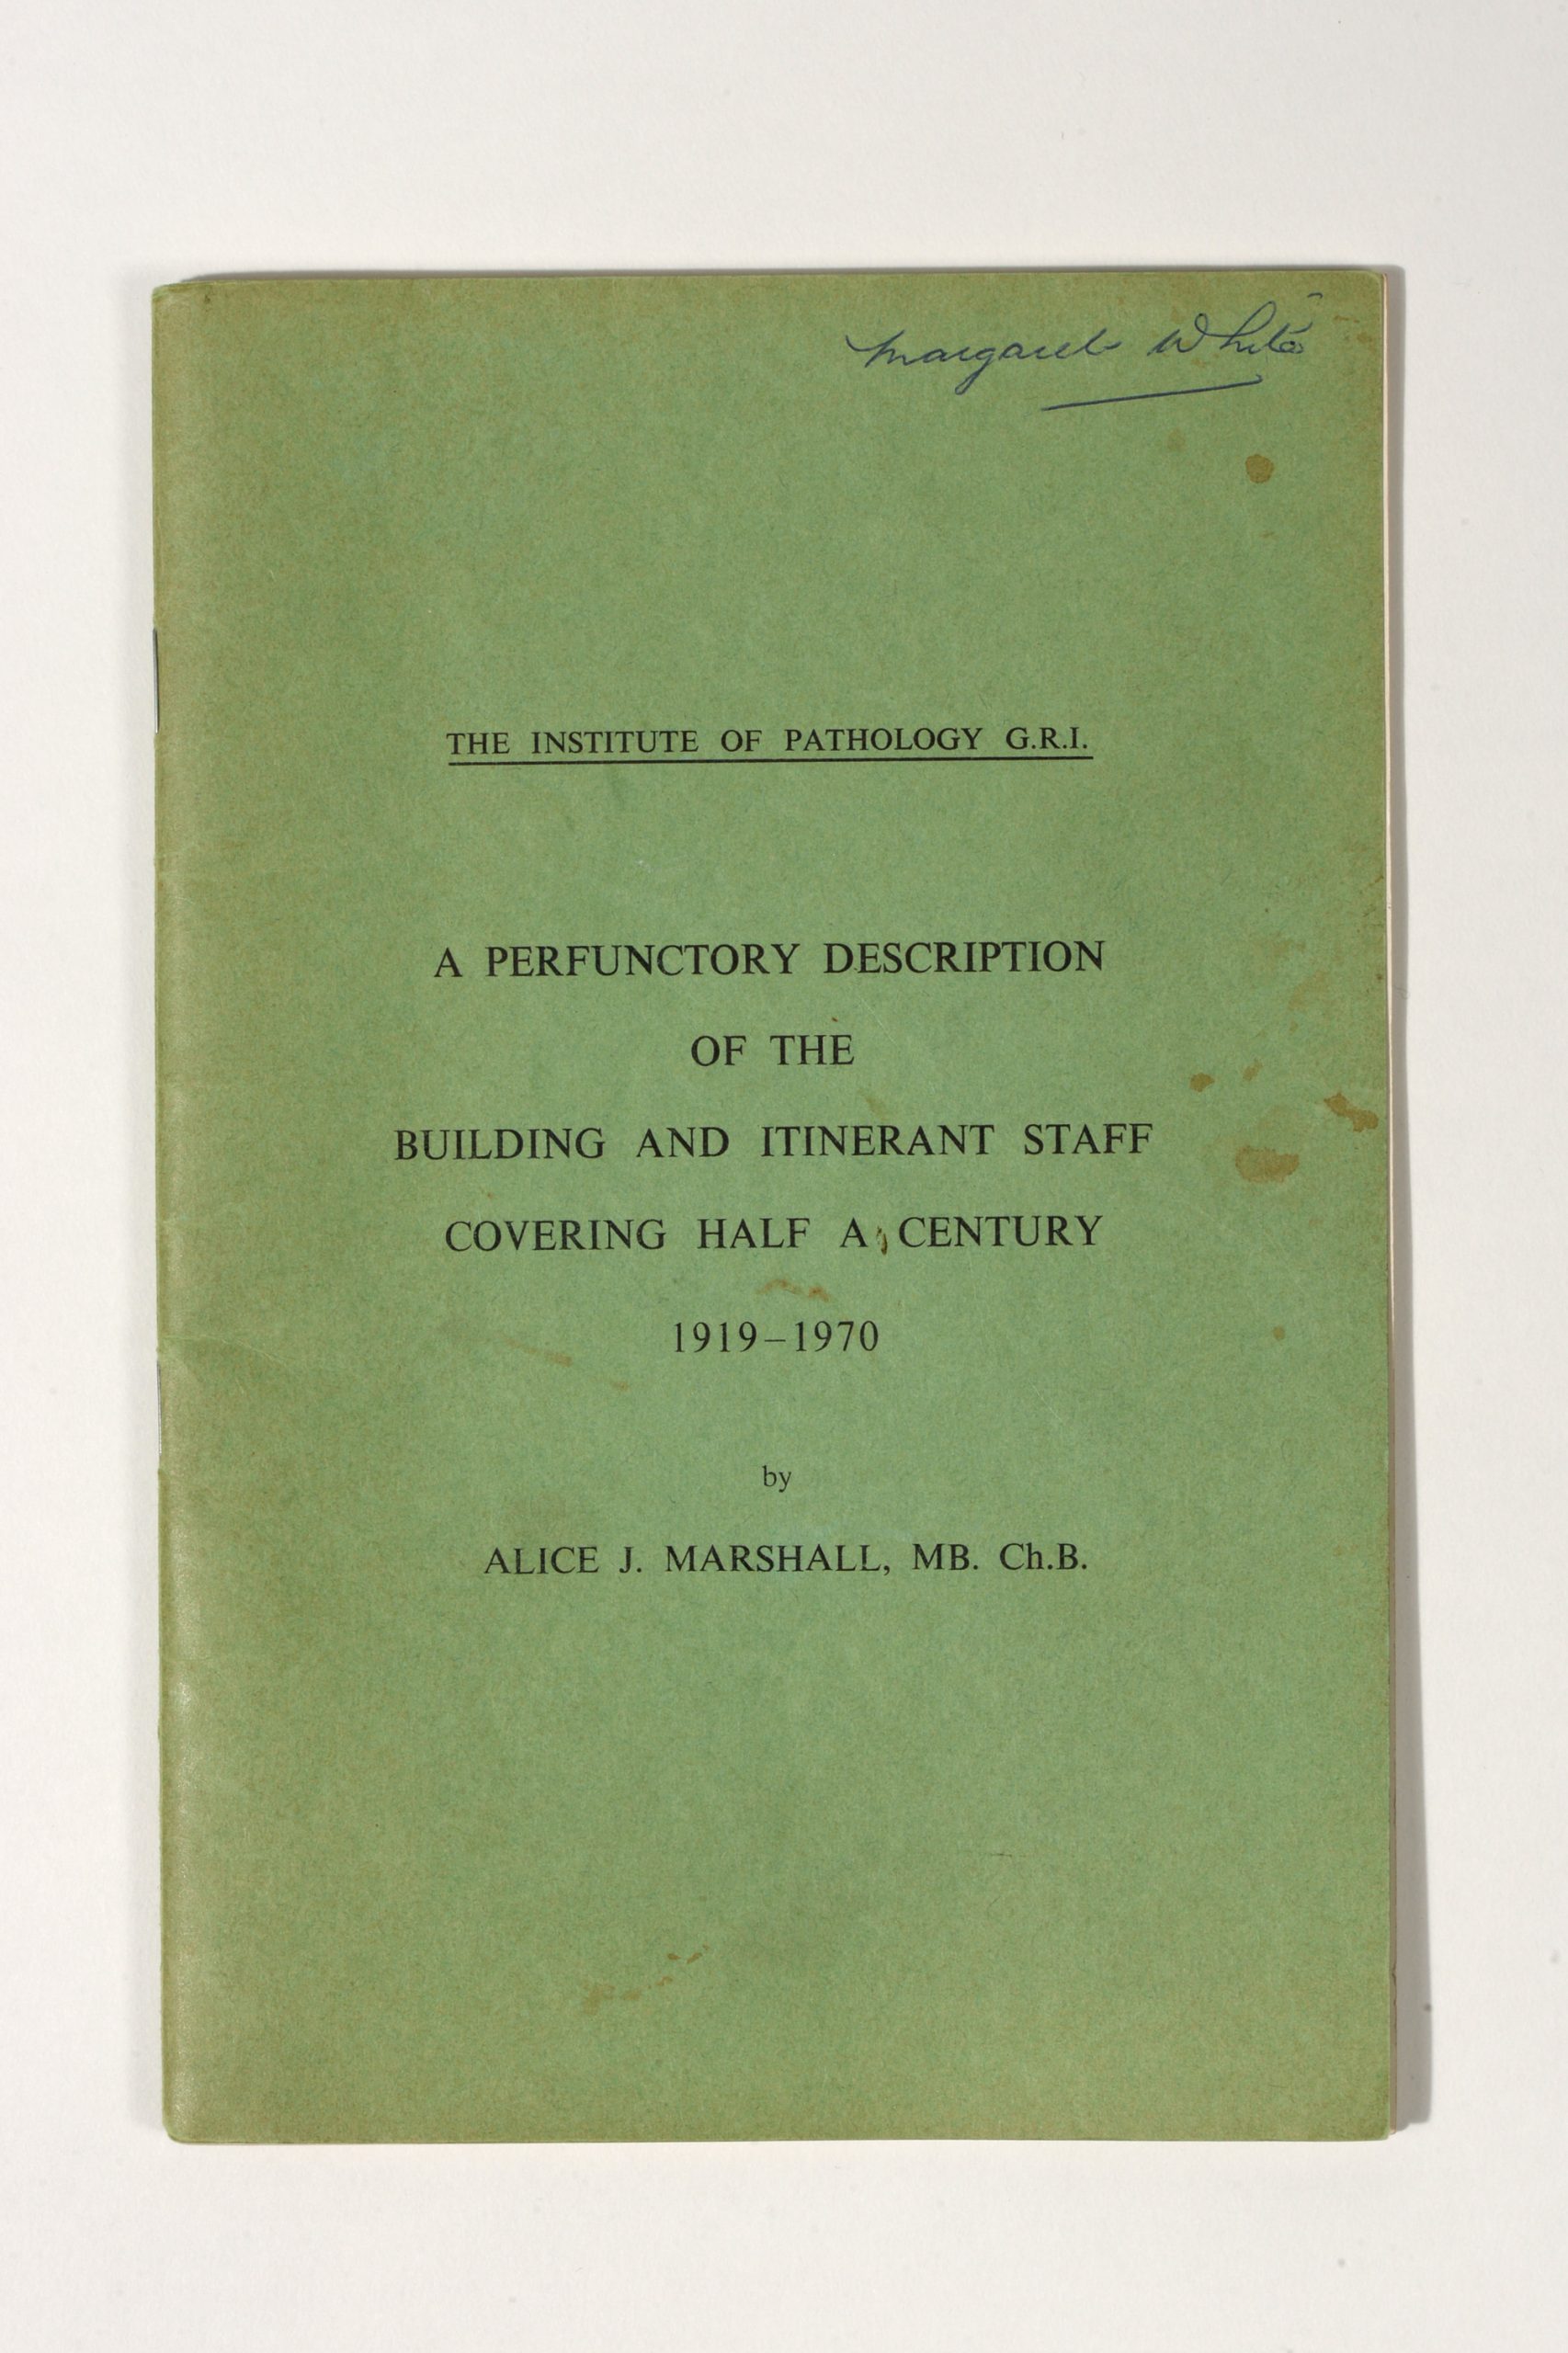 Pamphlet by Dr Alice J Marshall, GRI Pathologist who painstakingly catalogued thousands of specimens including many from William Hunter and William Macewen.  